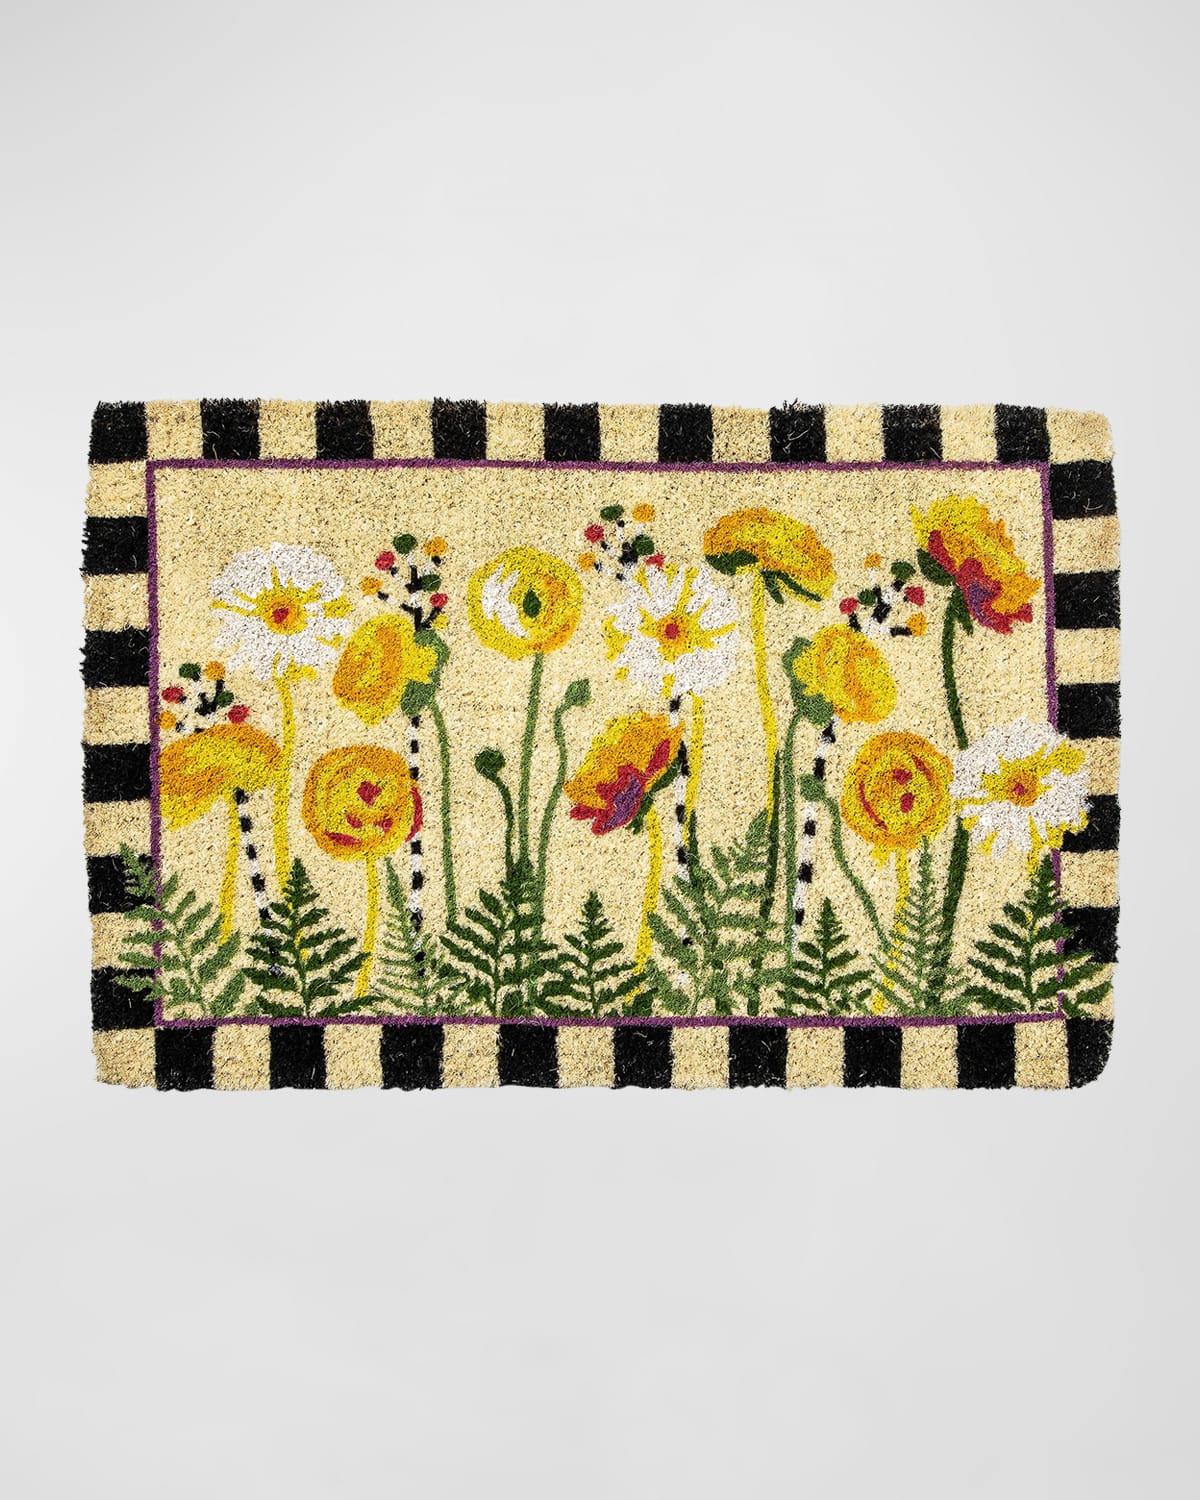 Shop Mackenzie-childs Everything Is Coming Up Daisies Entrance Mat